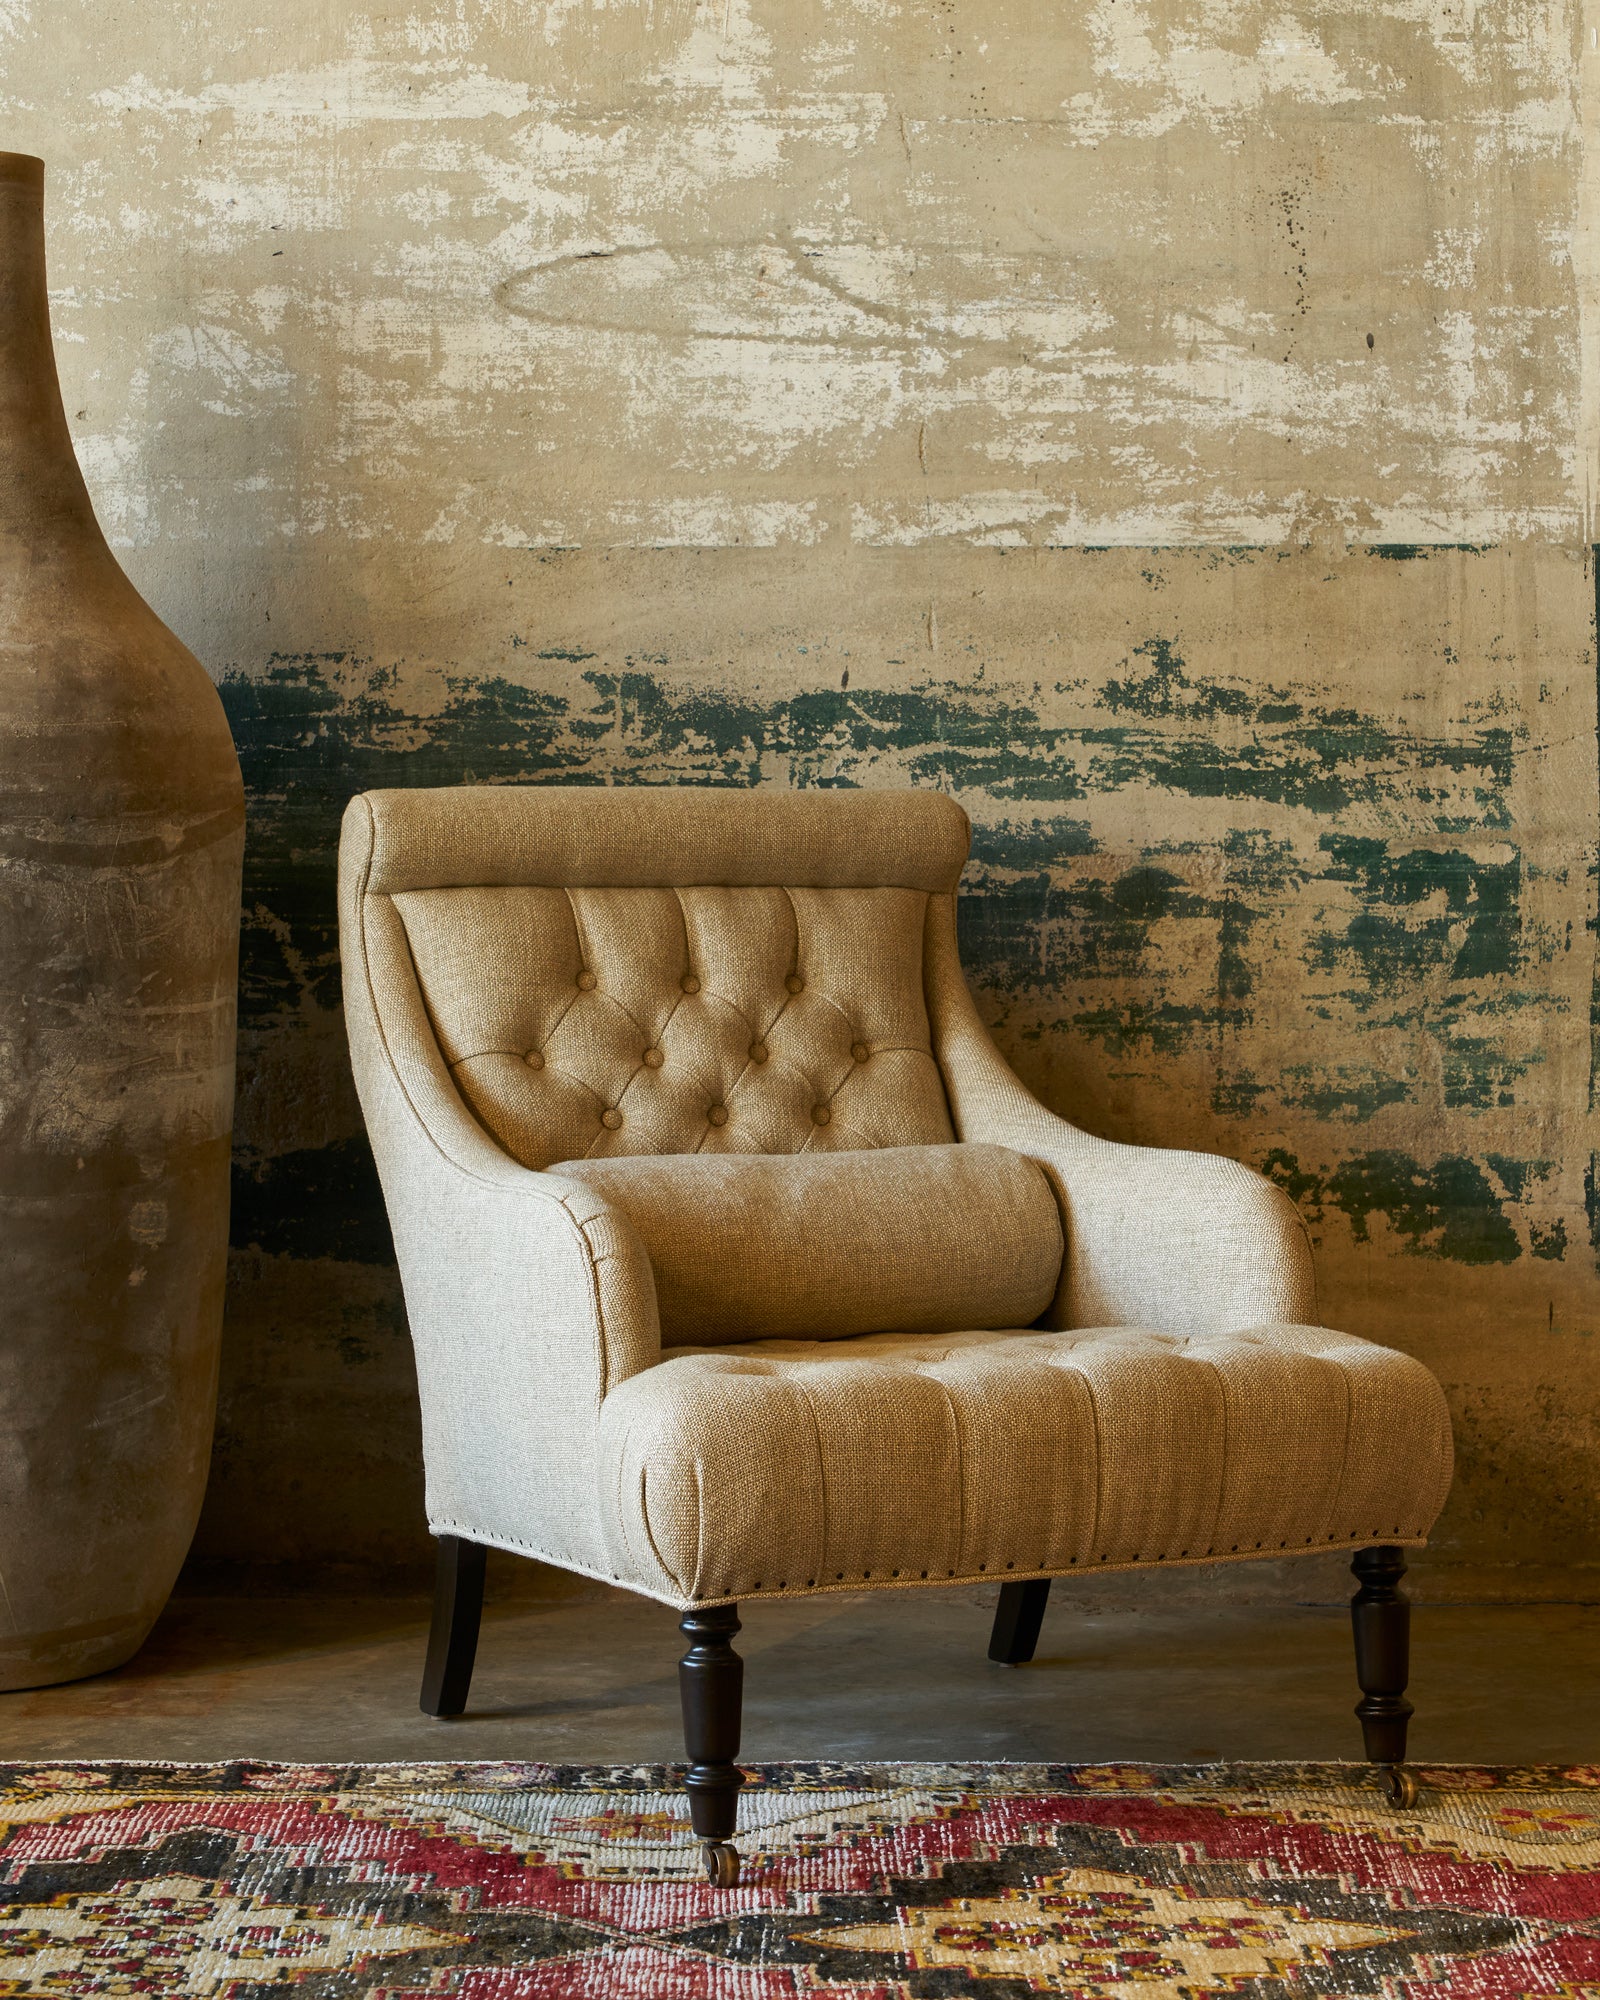  The Juliet chair is angled in front of a concrete wall and next to a large clay pot. Photographed in Avery Oatmeal 